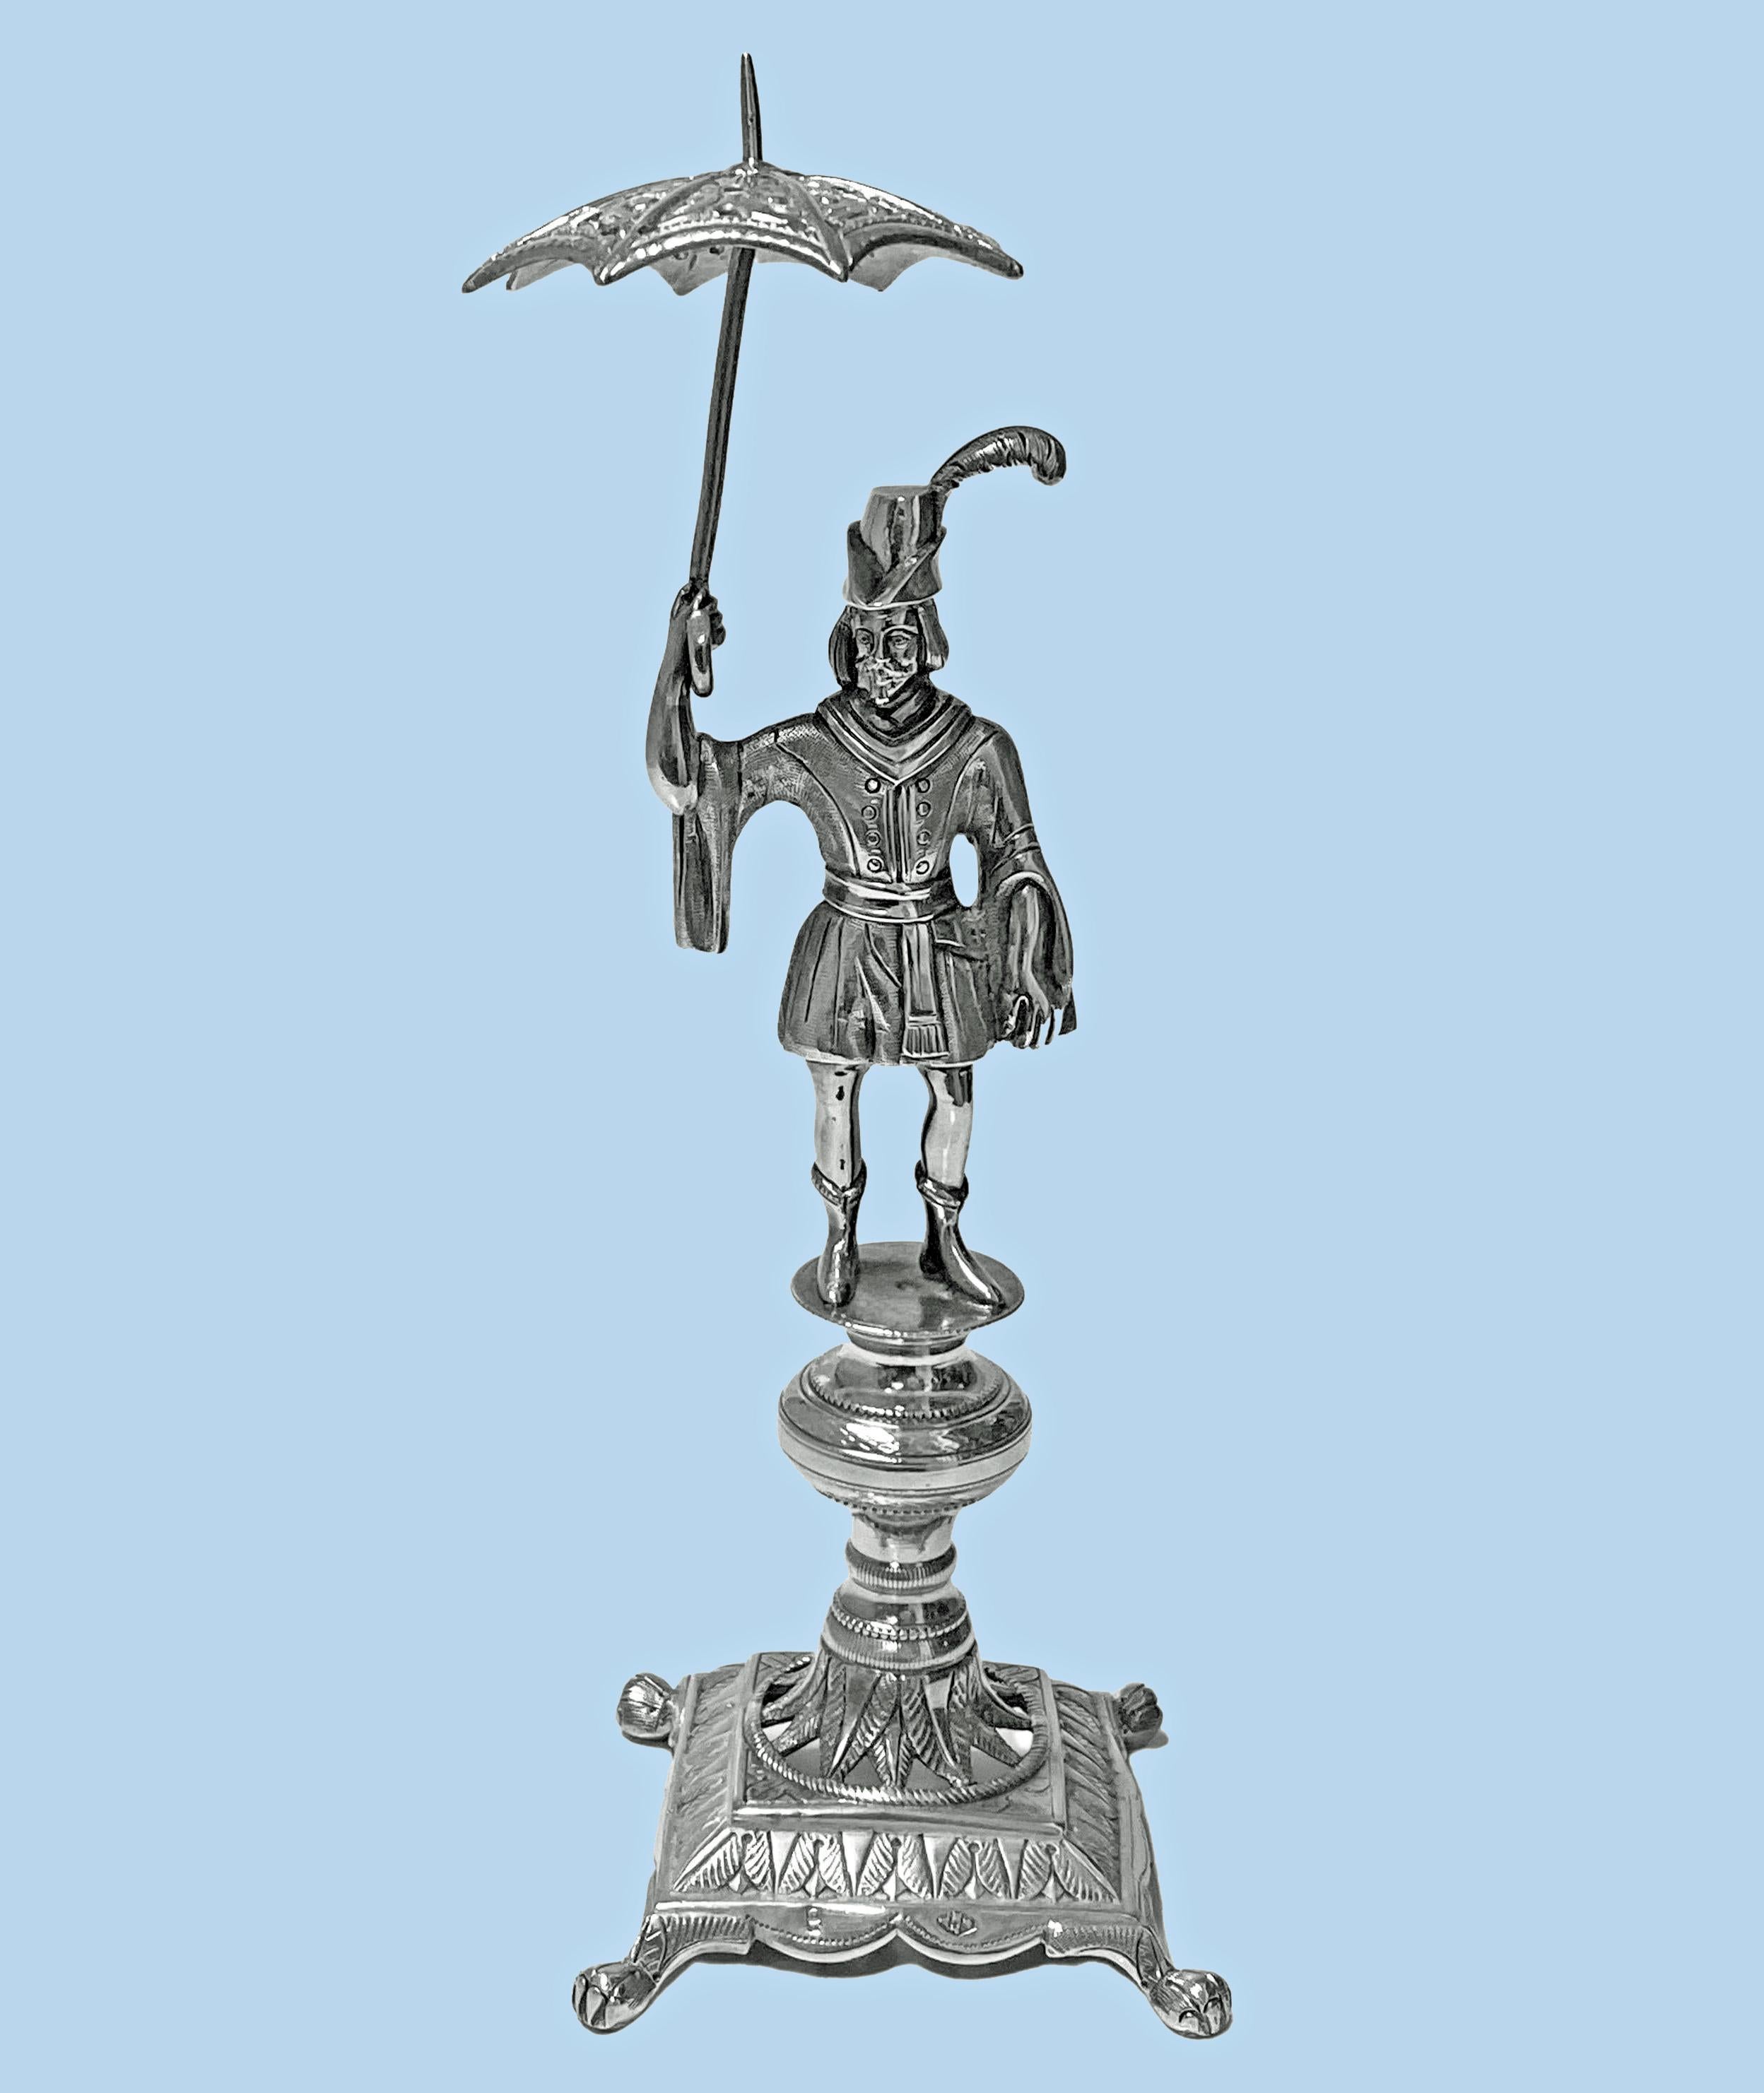 Antique silver toothpick or cocktail stick holder, Rio de Janeiro, Brazil, circa 1850. The holder in the form of a continental livery uniformed male figure holding an open umbrella with pierced holes for toothpicks or cocktail sticks. The holder on